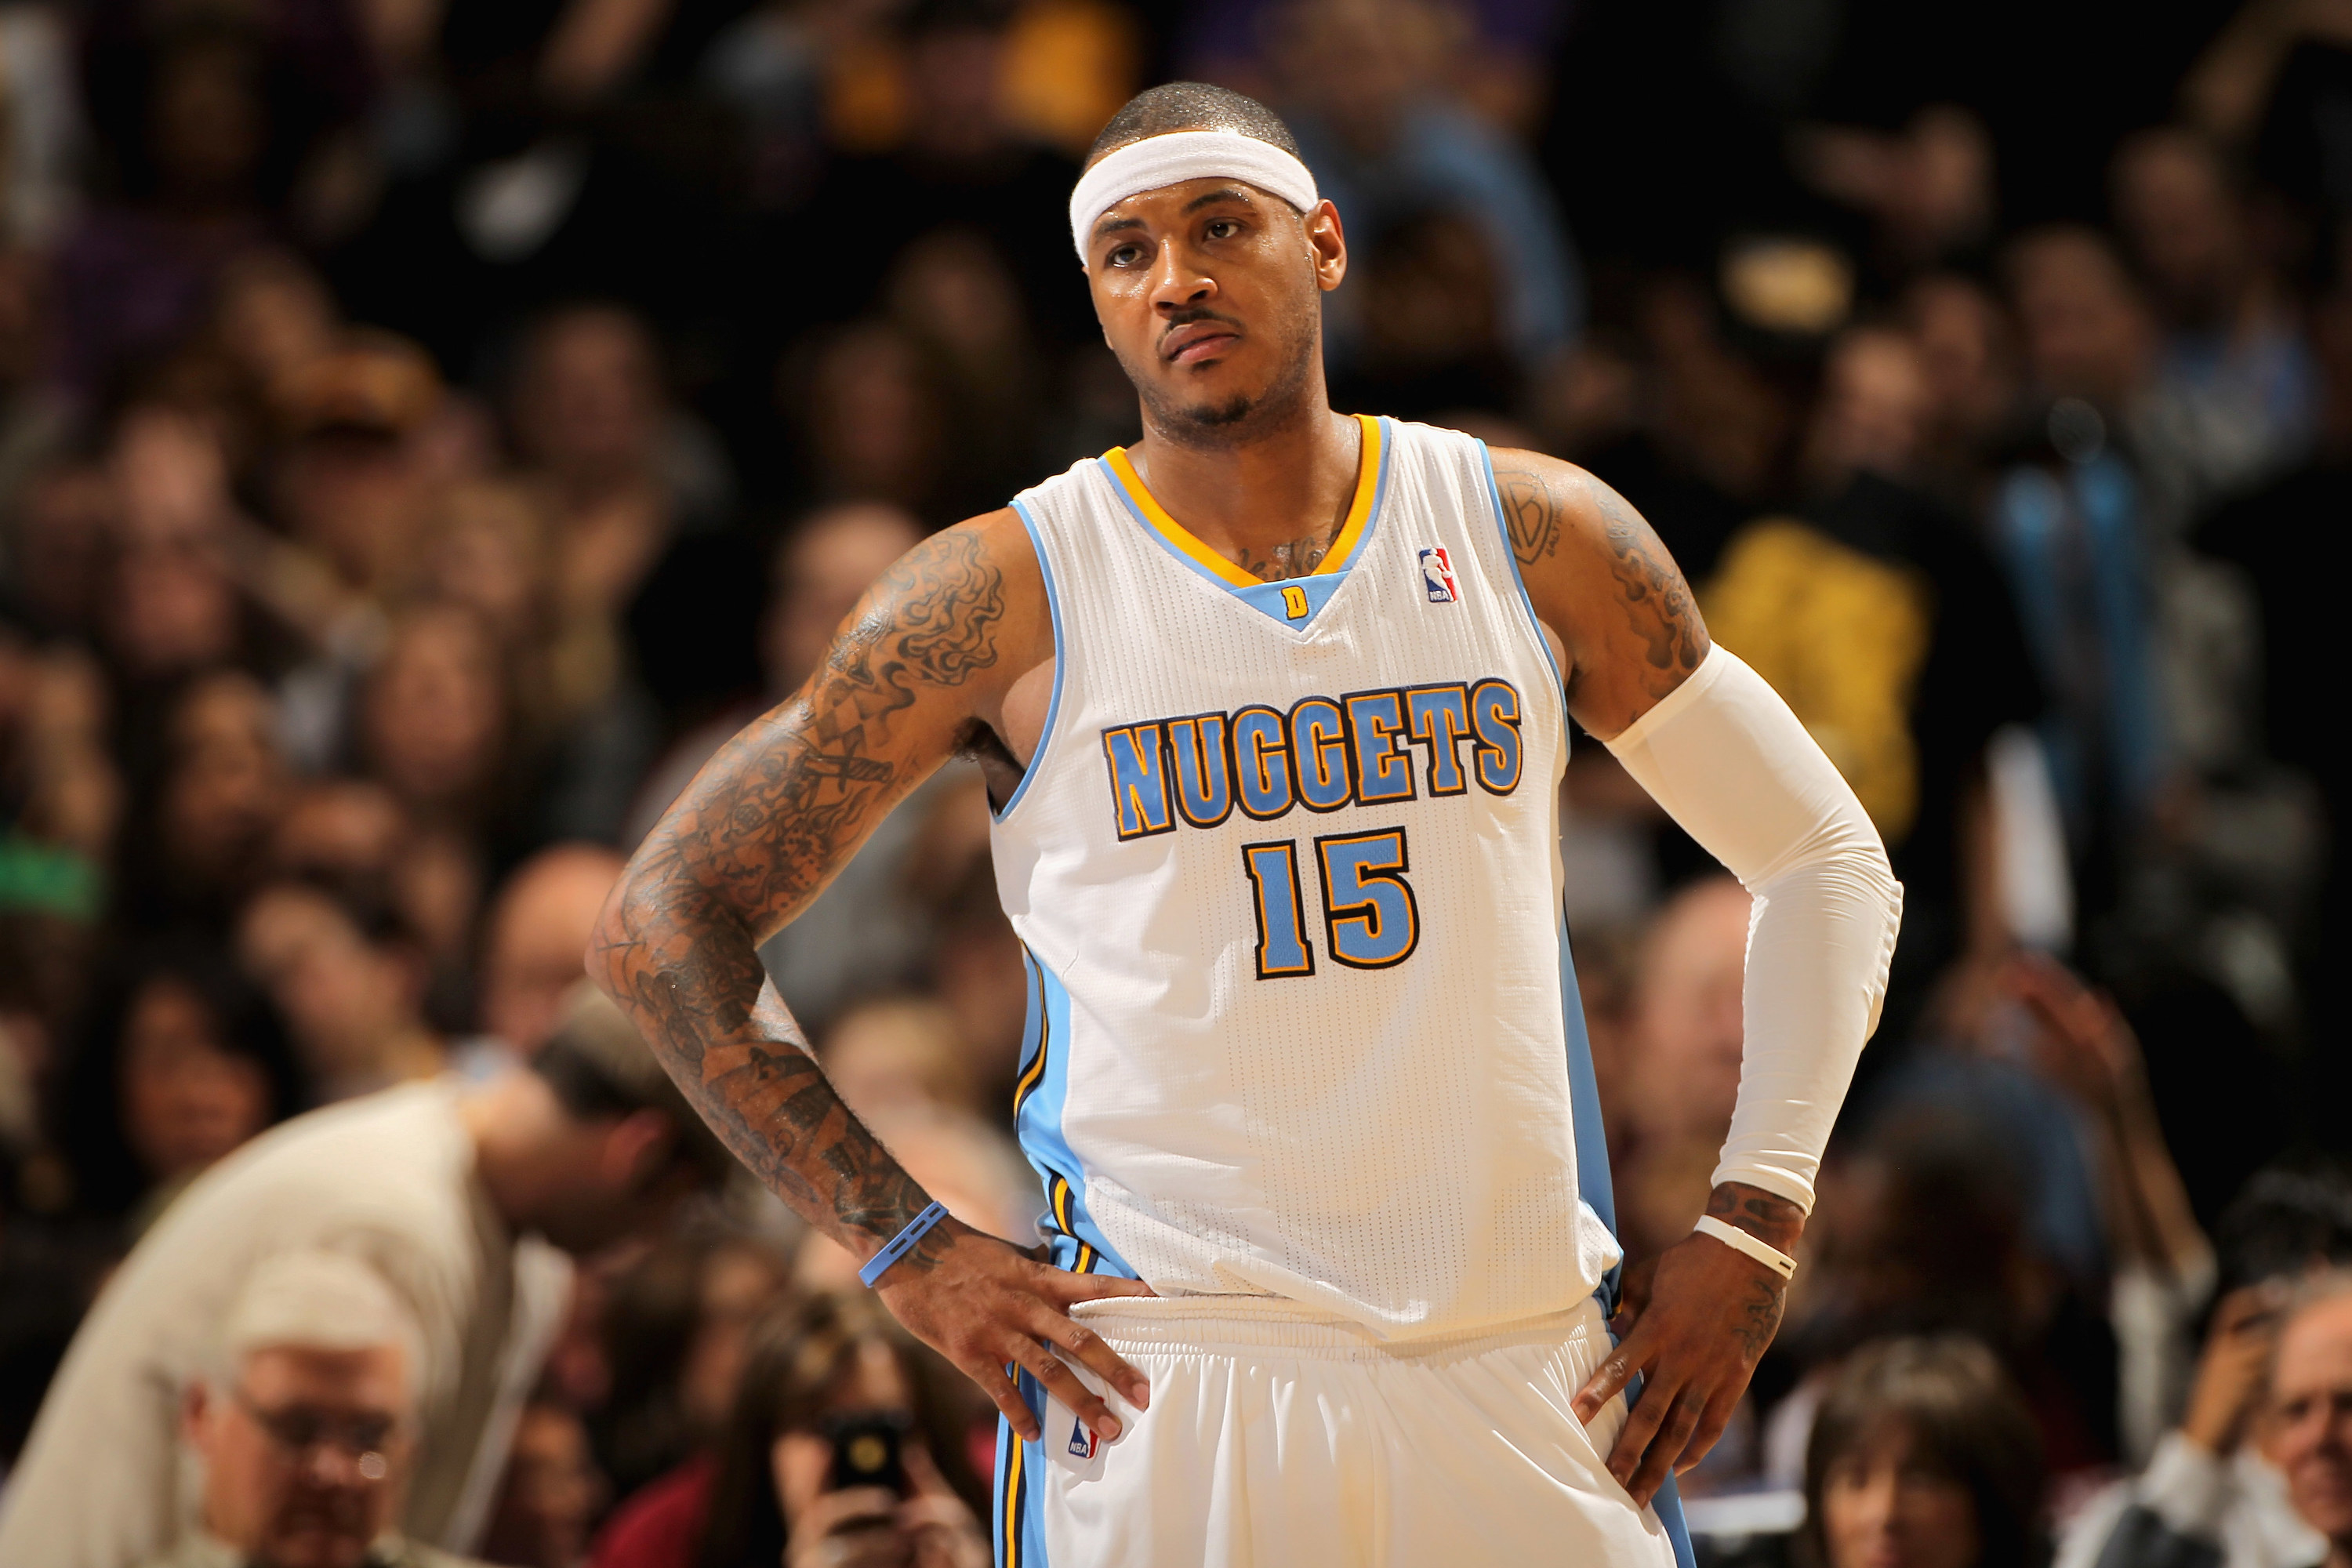 White Nuggets jersey with baby blue lettering and yellow outlining